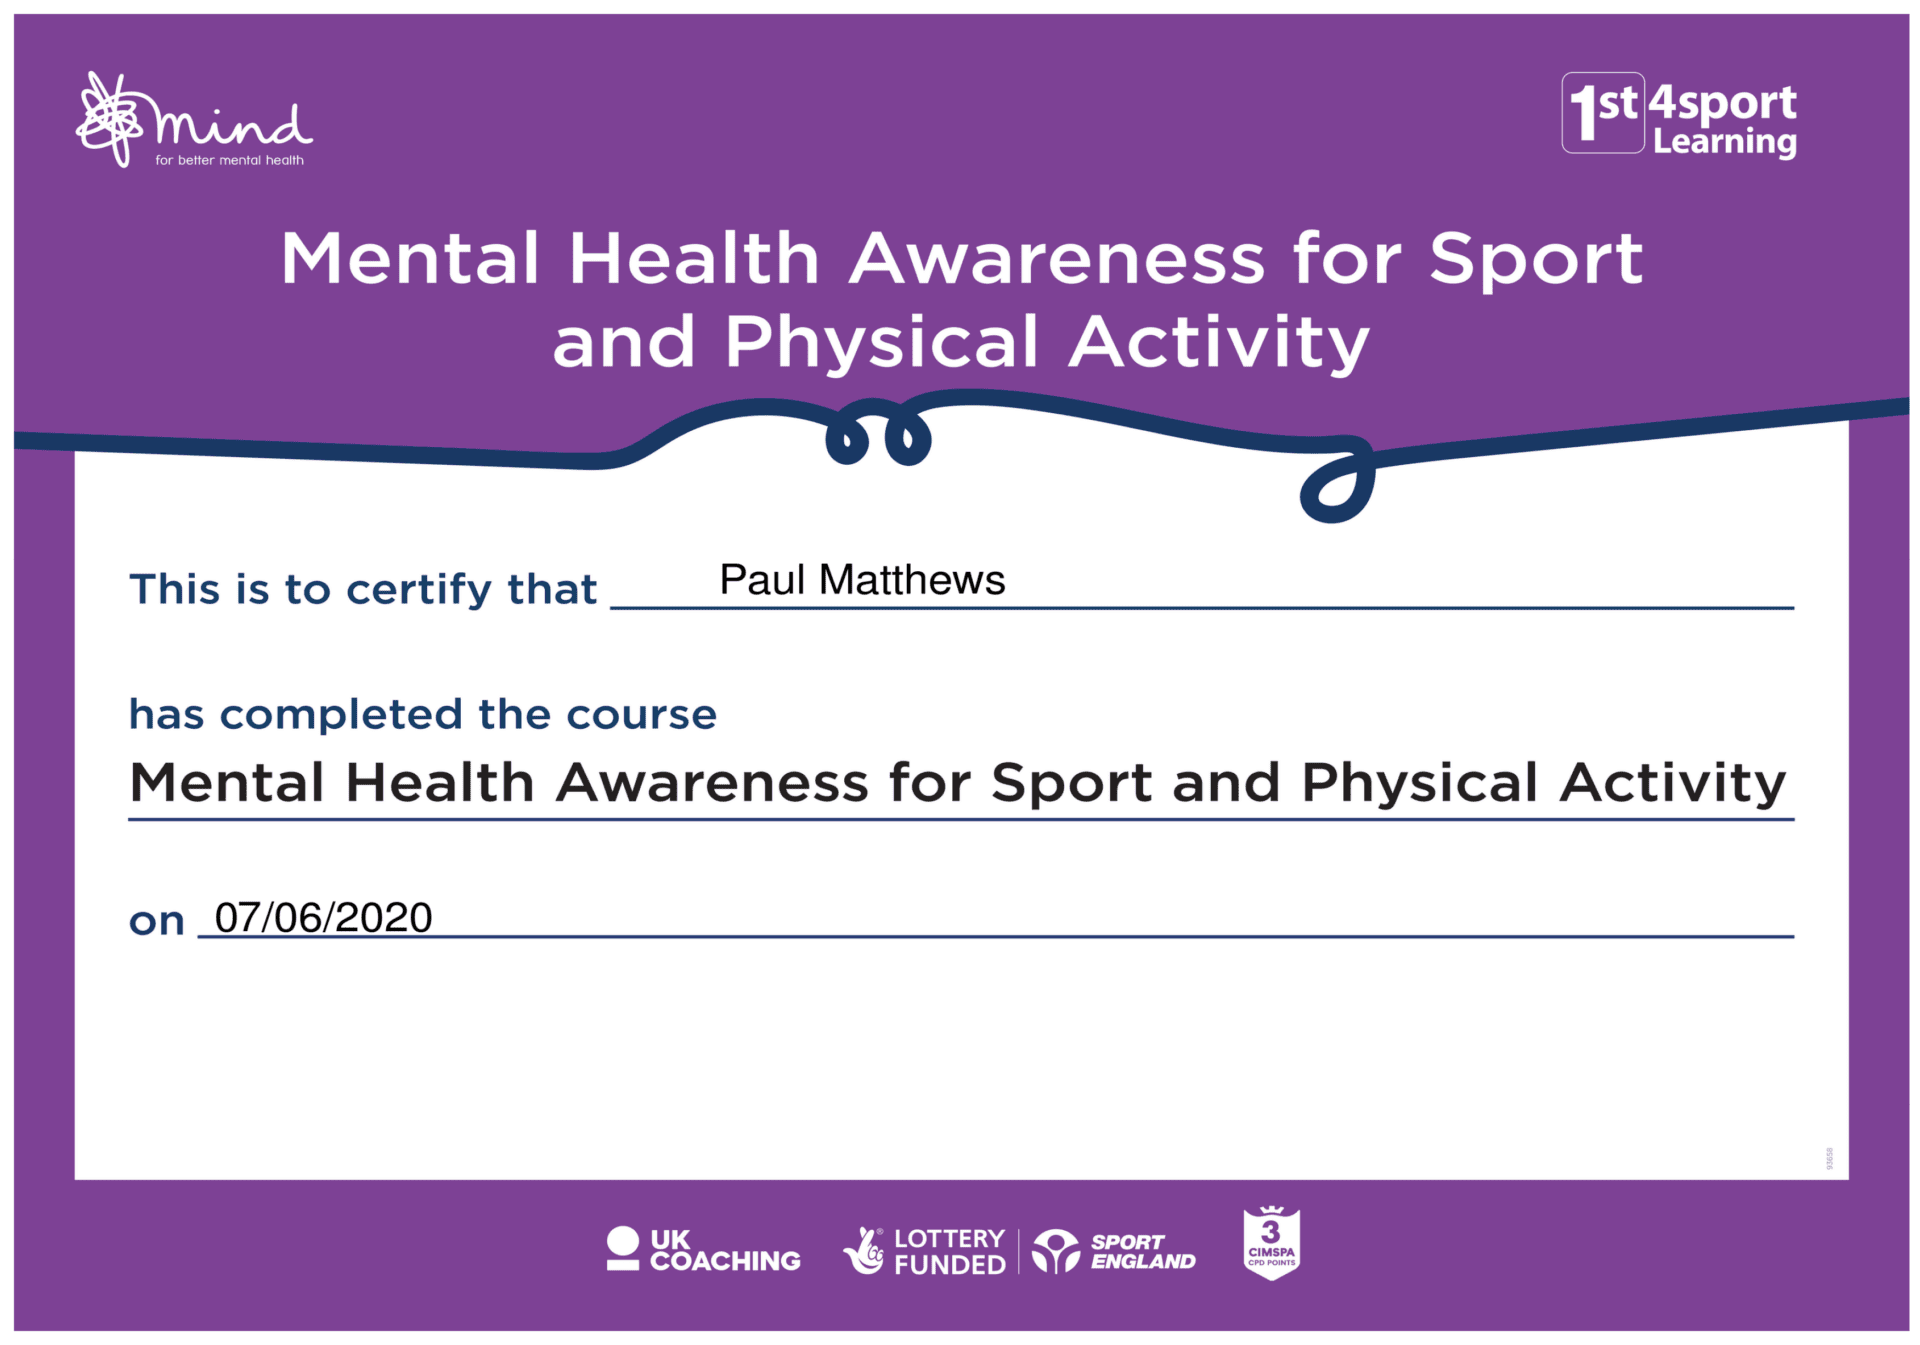 Mental Health Awareness for Sport and Physical Activity Course Passed